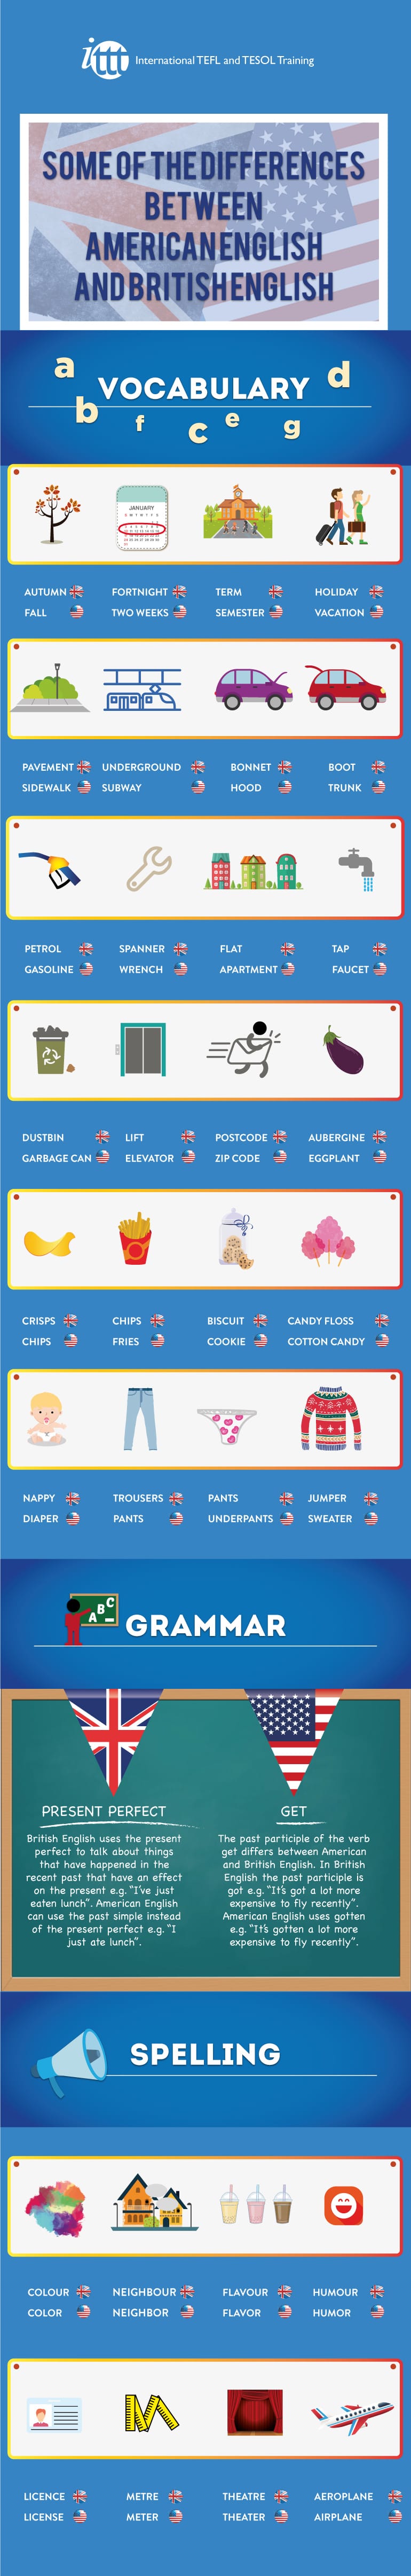 Some of the differences between American English and British English